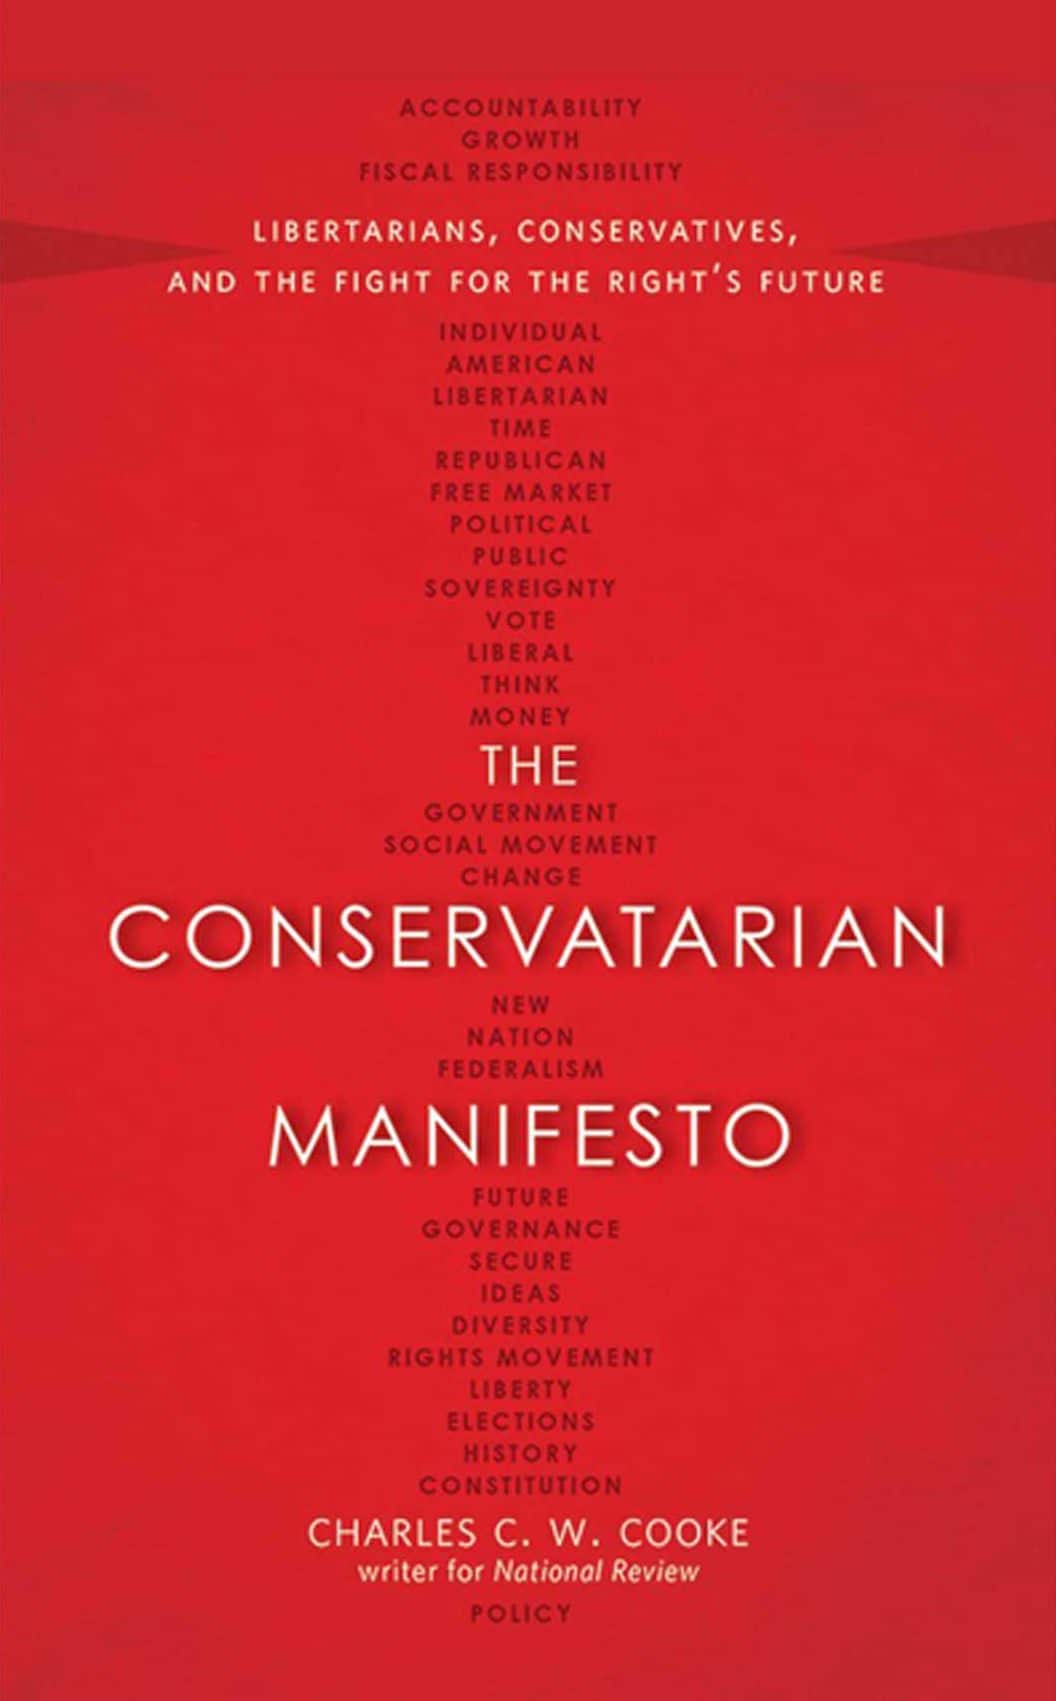 Book of the week: The Conservatarian Manifesto